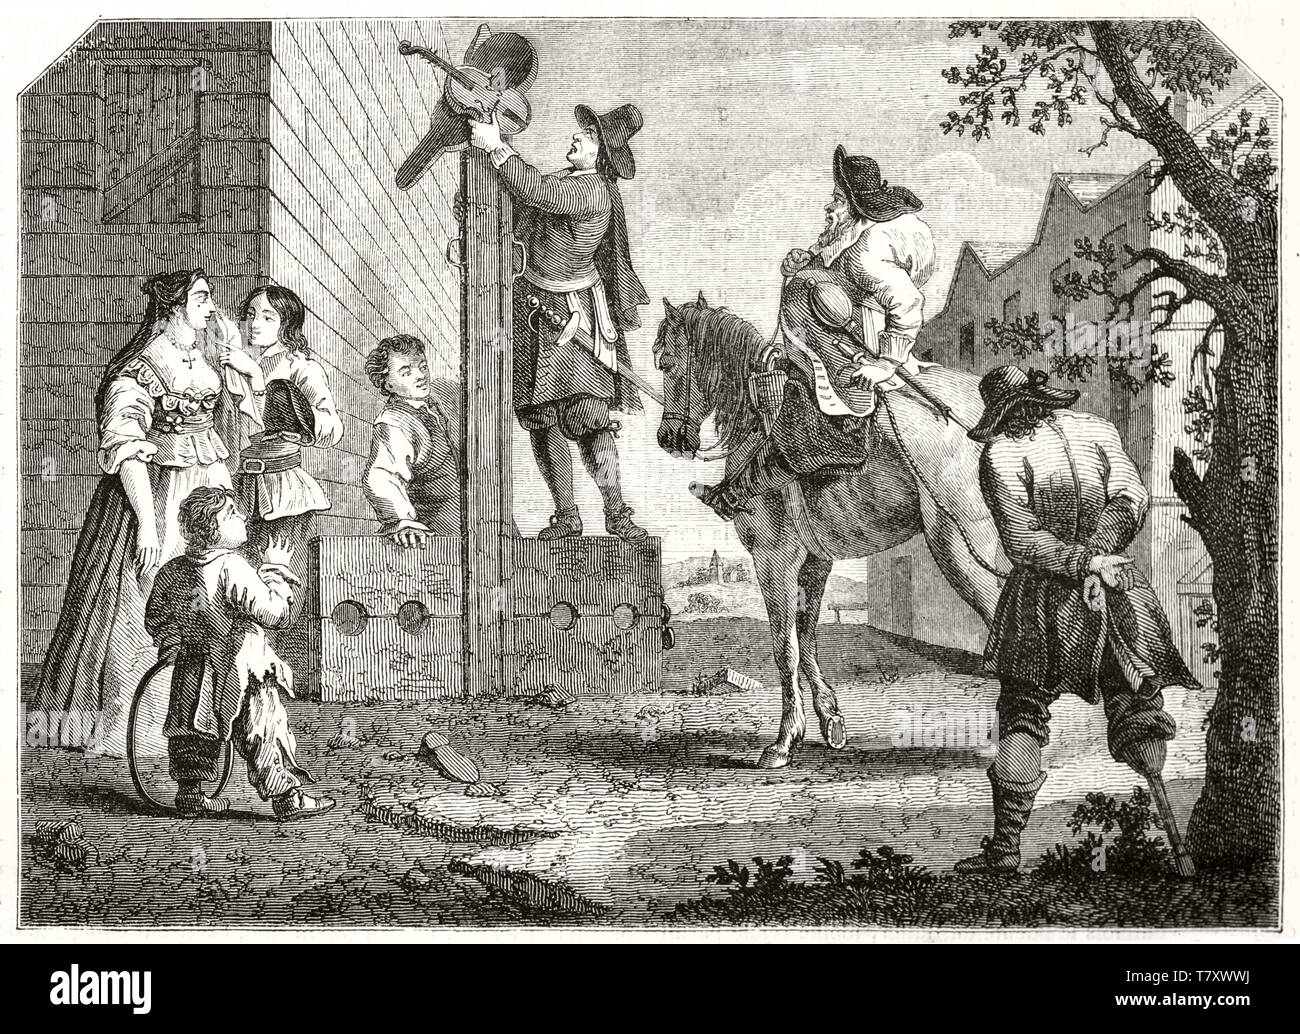 Ancient prisoner conducted to the pillory outddoor. Old illustration of a scene from Hudibras poem (prisoner Crodero conducted to the pillory). By Hogarth, Magasin Pittoresque Paris 1848 Stock Photo